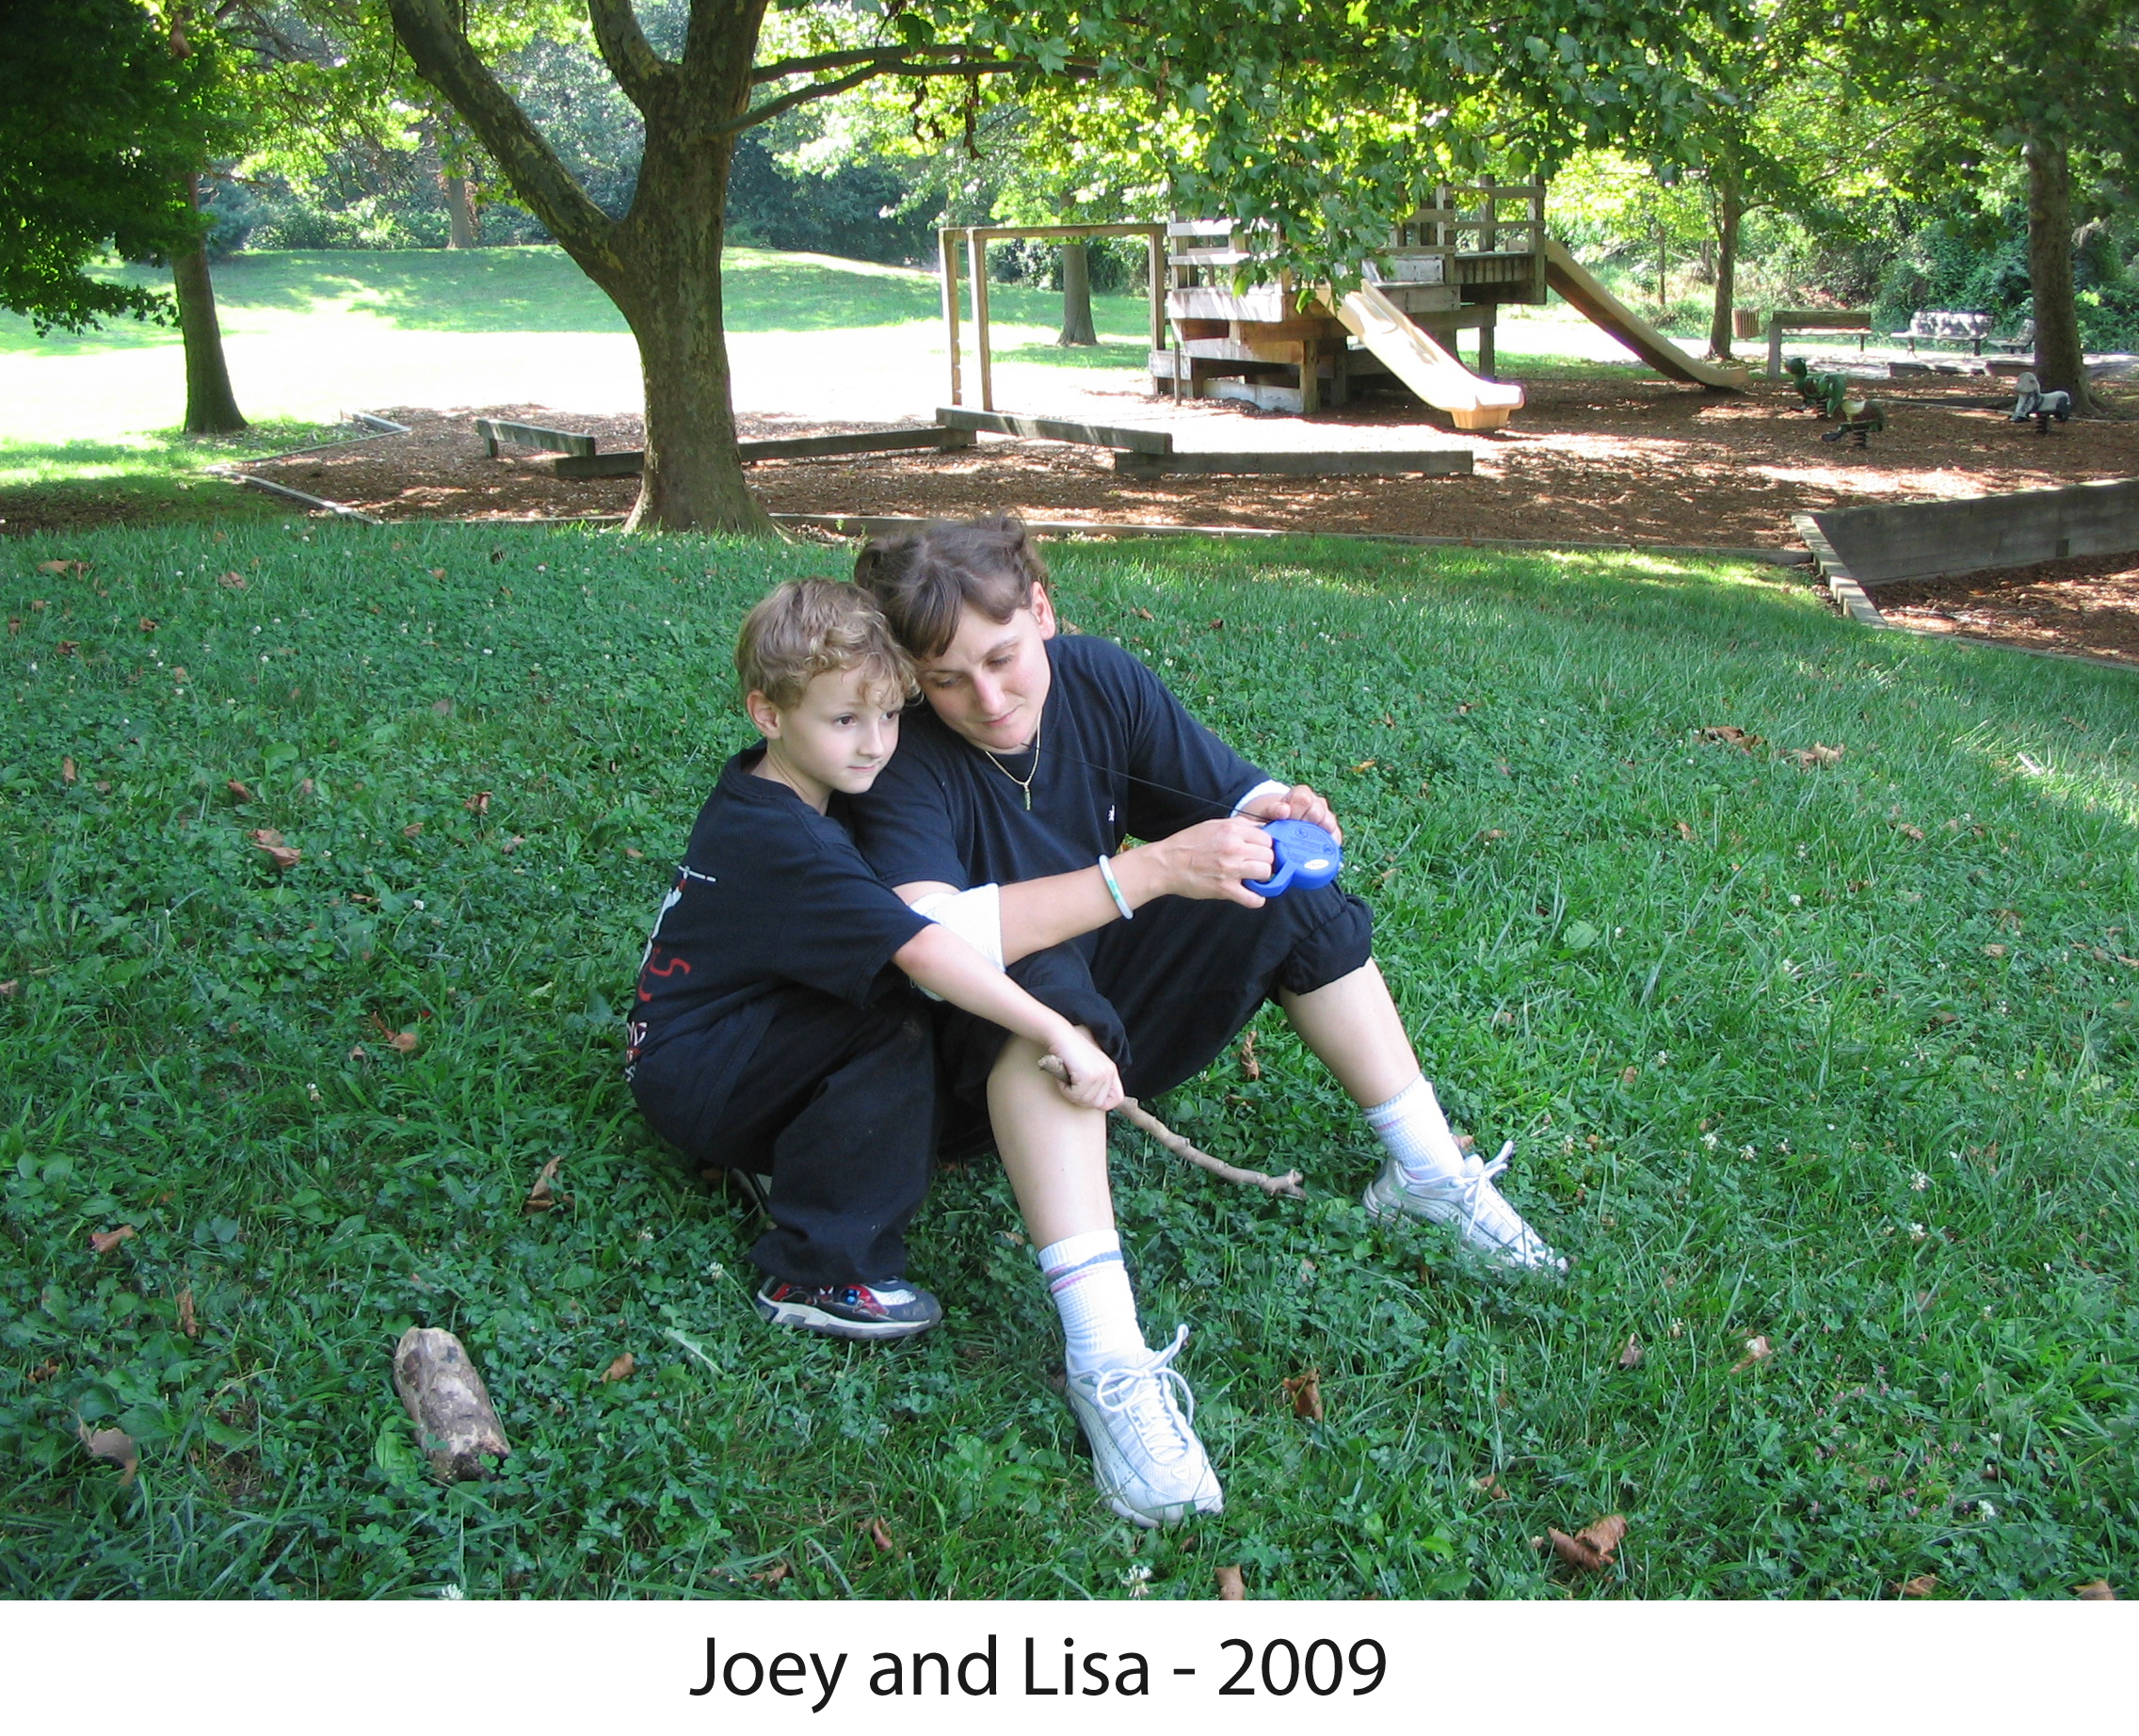 Joey and Lisa sitting together
     on the grass in front of the playground in our Tot Lot